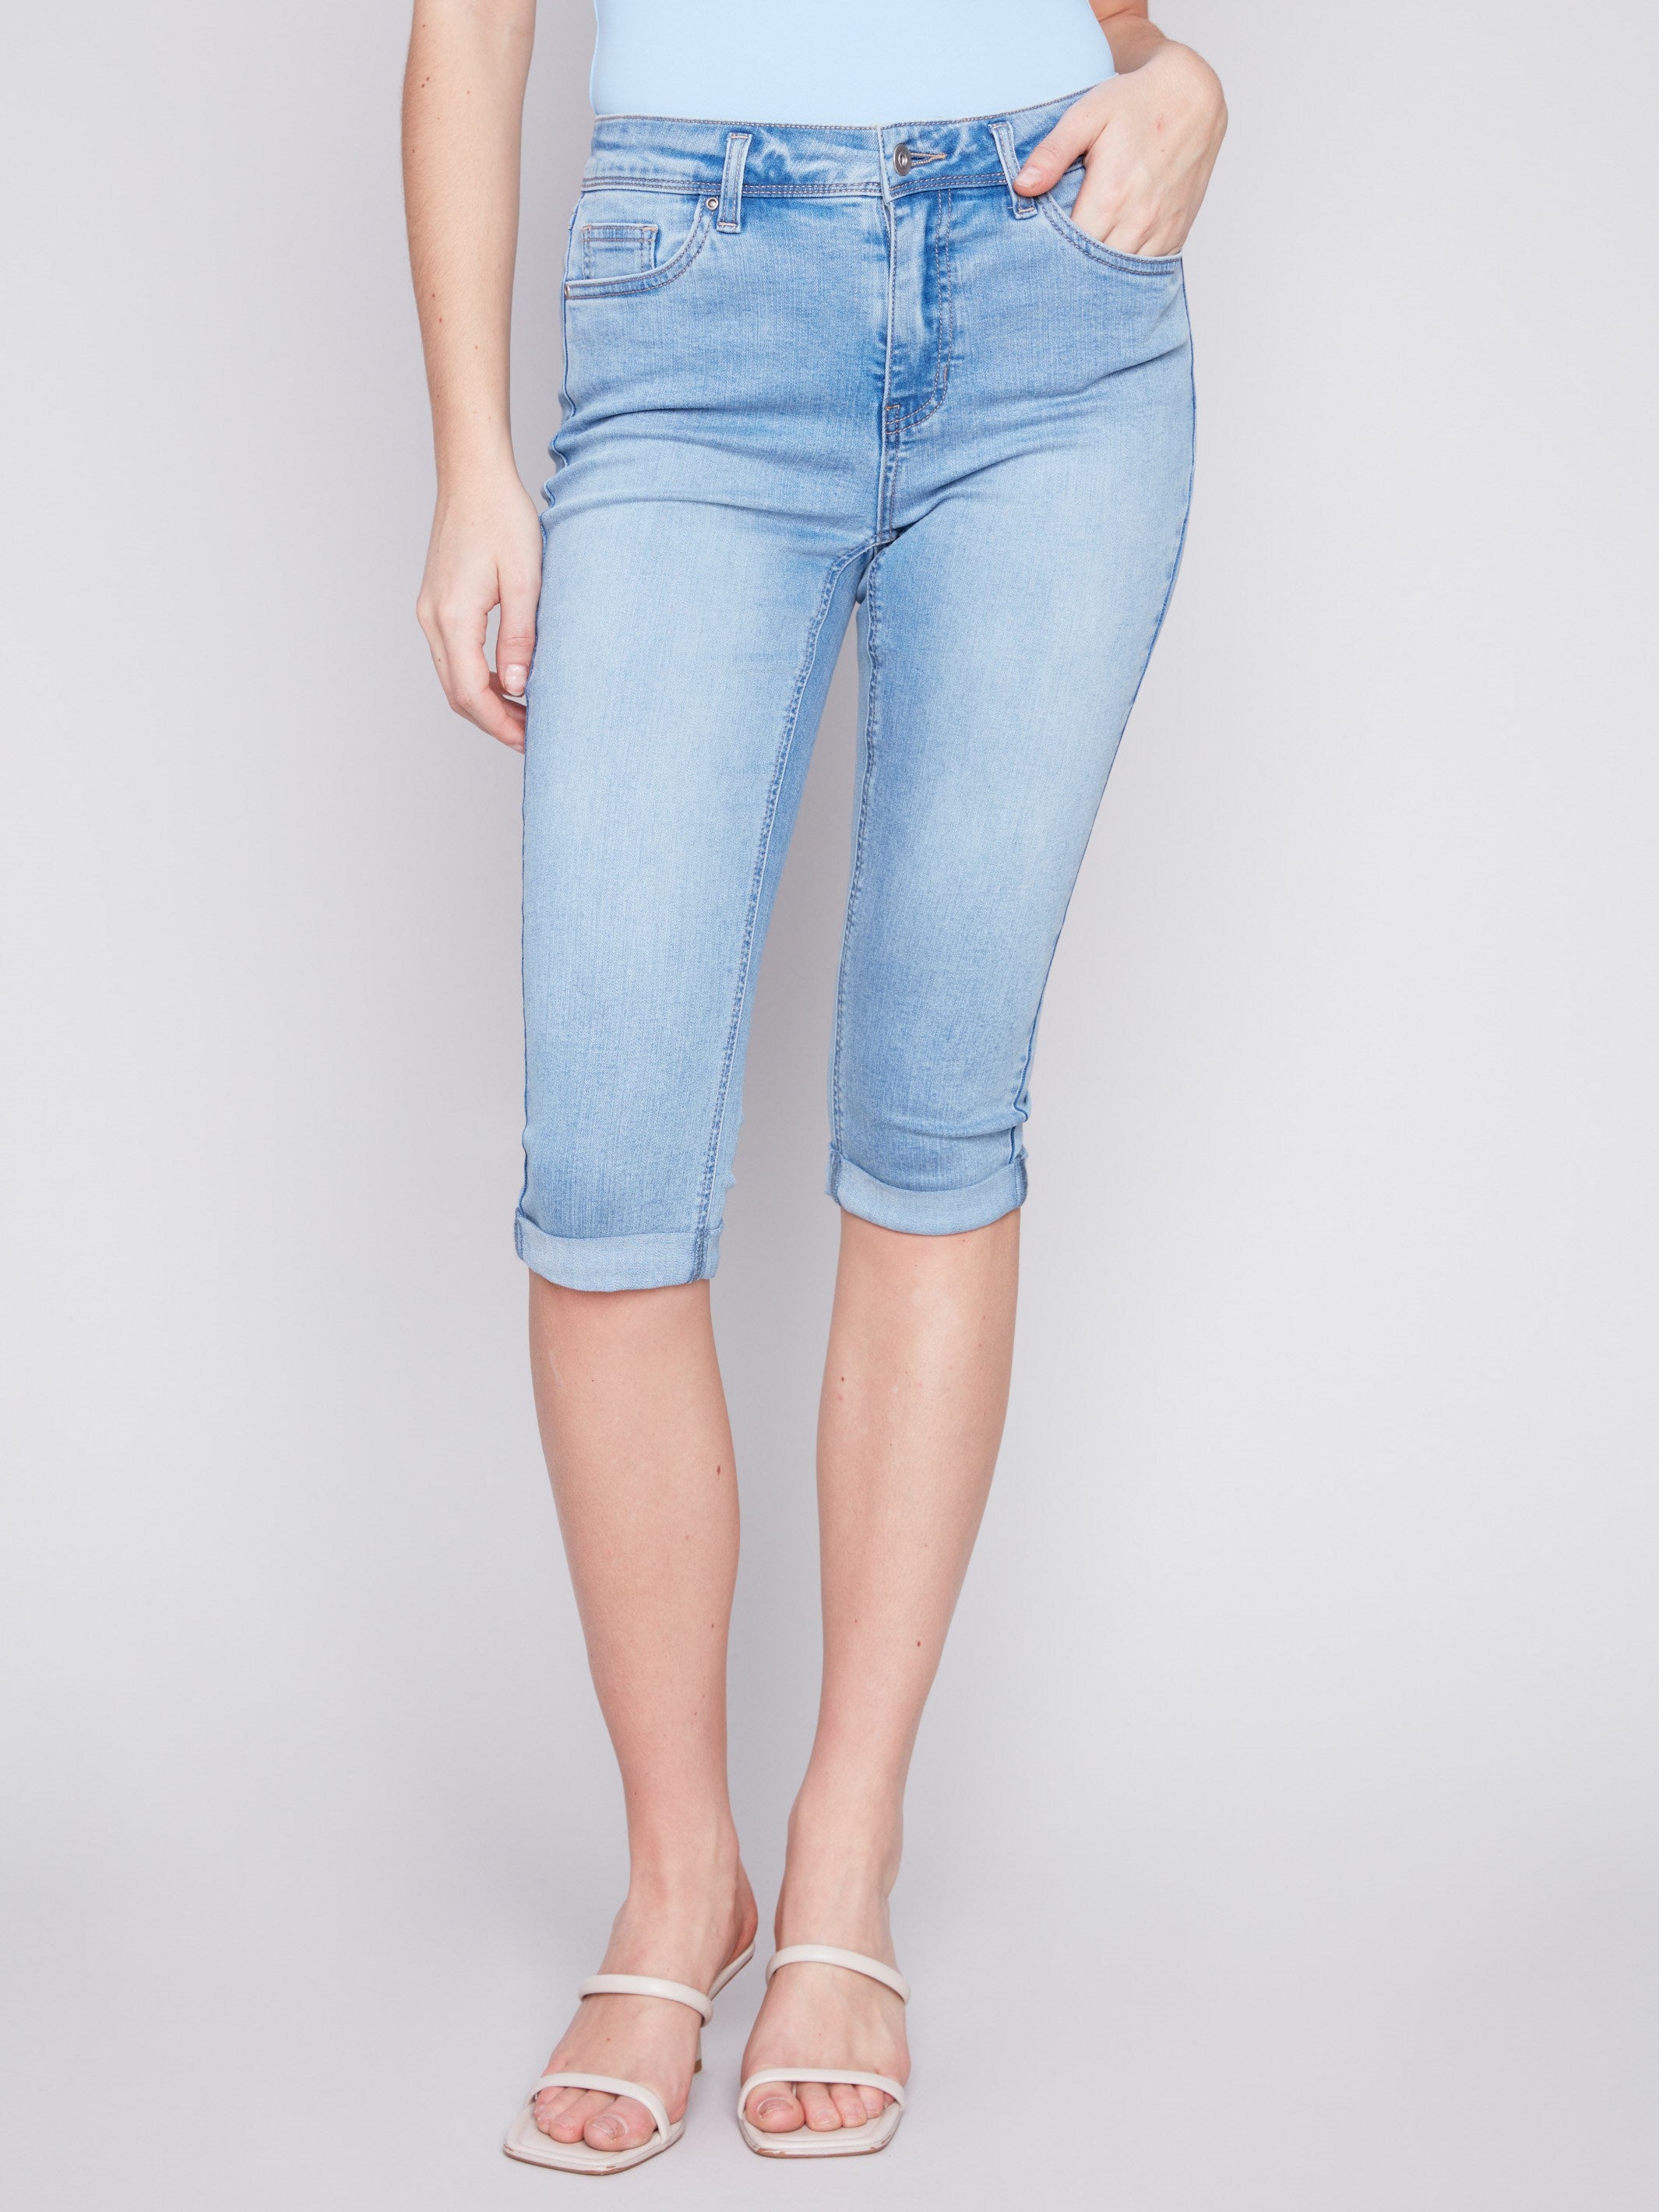 Stretch Denim Pedal Pusher Pants - Light Blue - Charlie B Collection Canada - Image 3